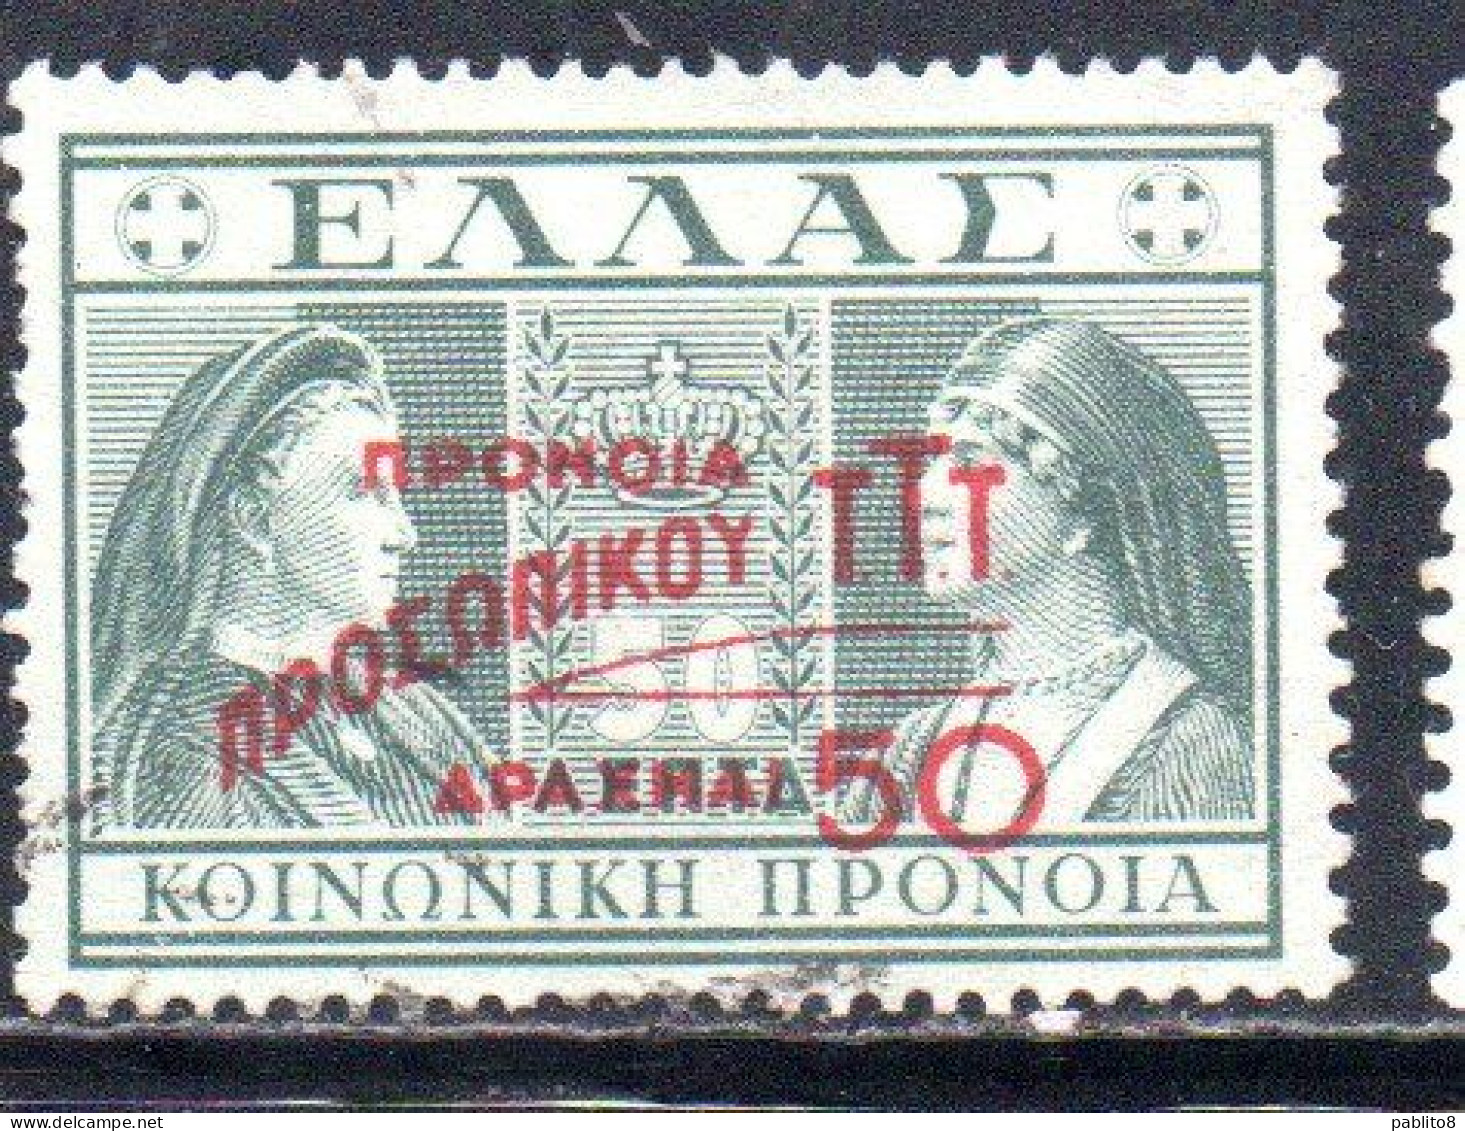 GREECE GRECIA ELLAS 1946 1947 POSTAL TAX STAMPS TUBERCULOSIS SURCHARGED 50d On 50l USED USATO OBLITERE' - Revenue Stamps